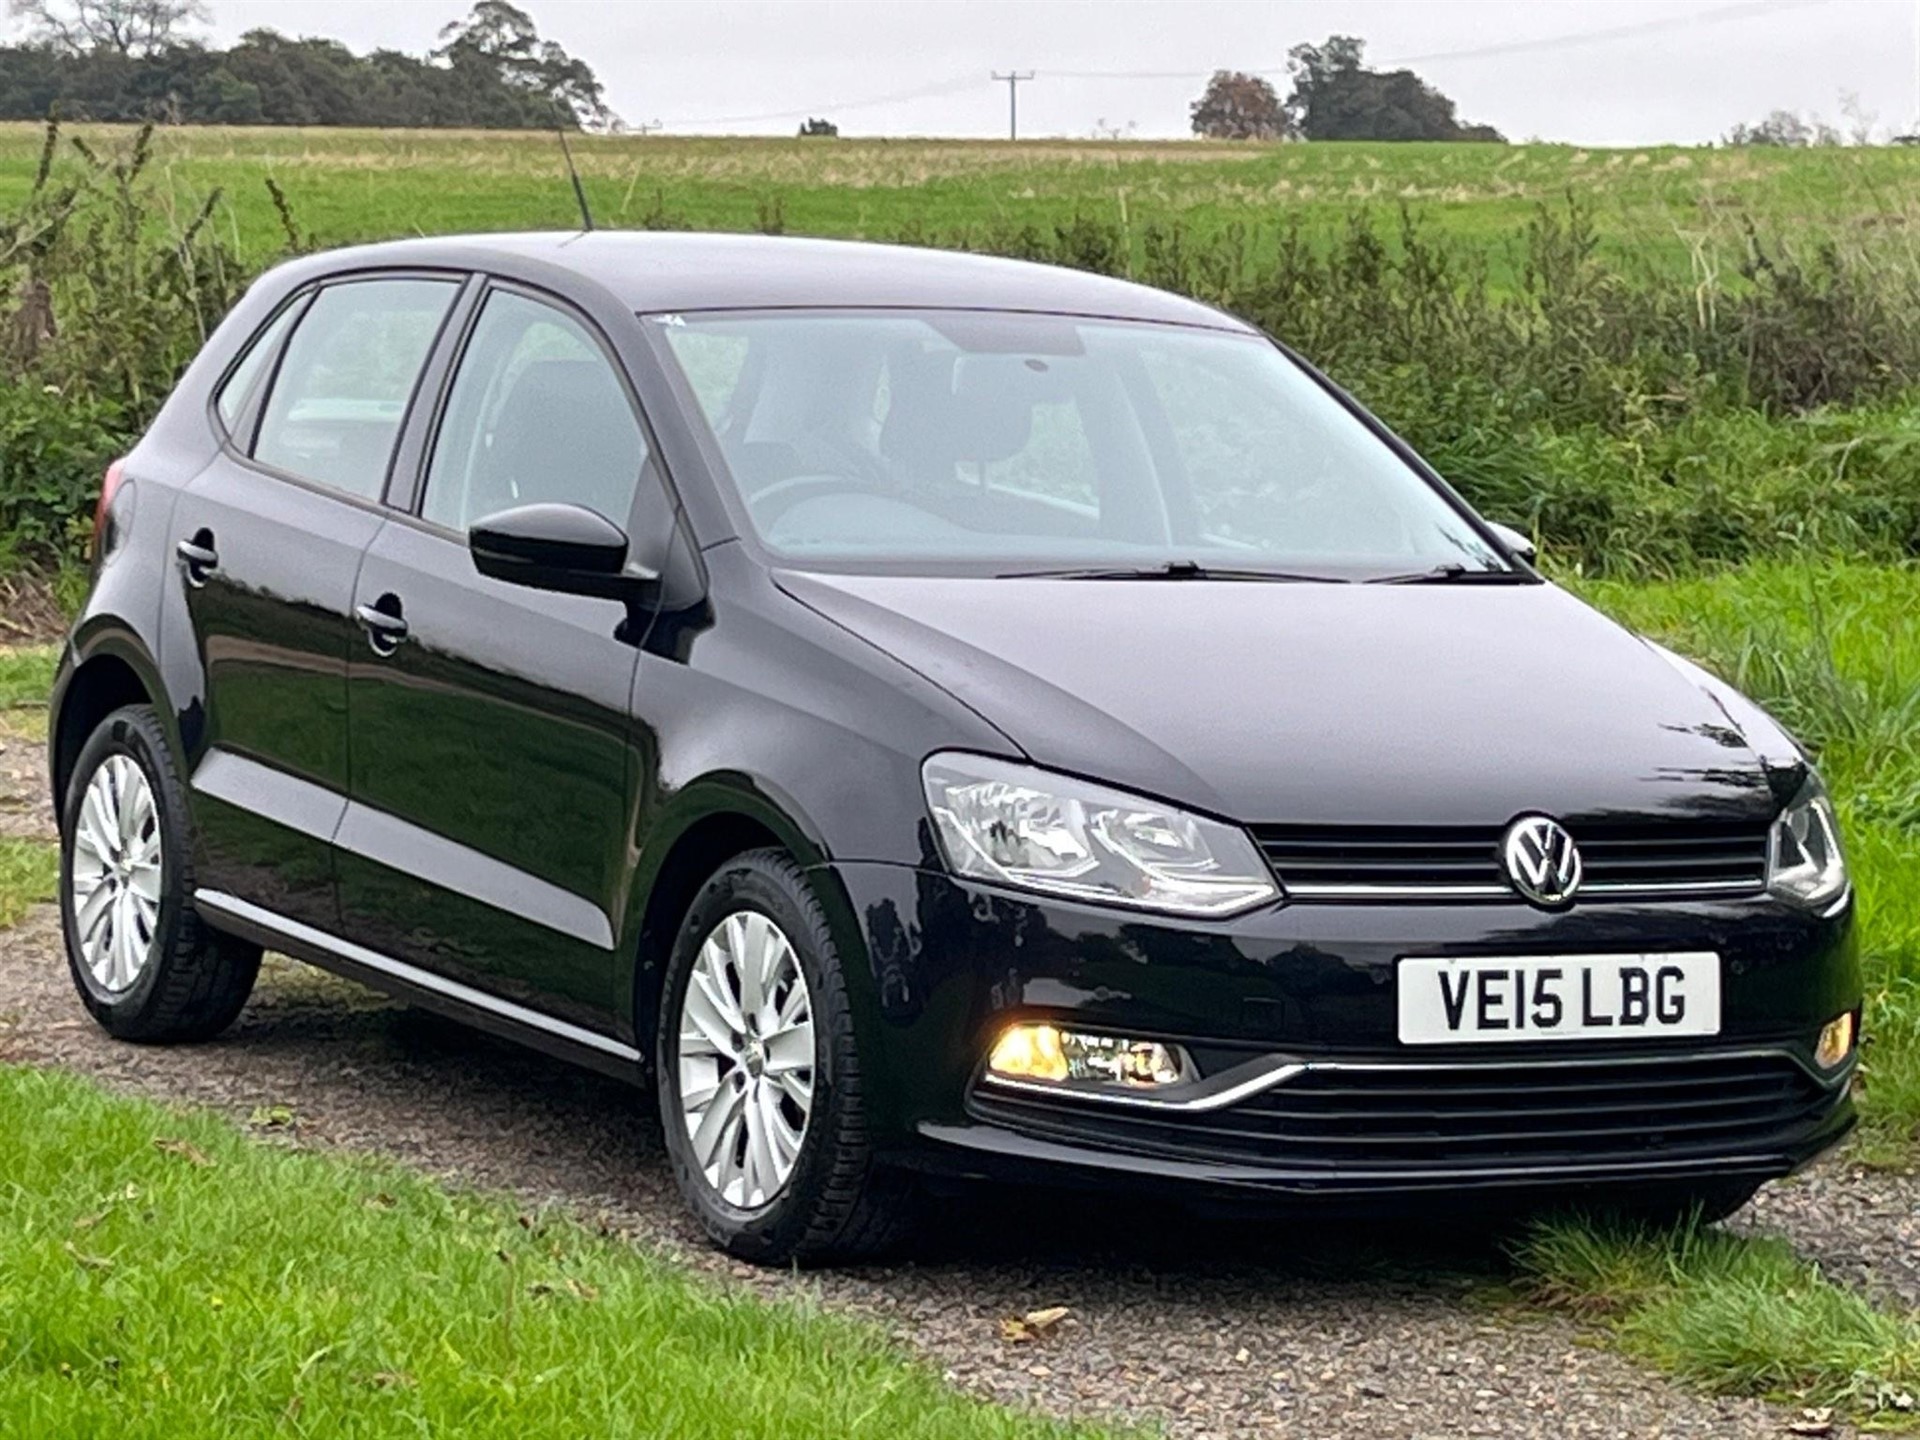 Used Volkswagen Polo for sale in Daventry, Northamptonshire